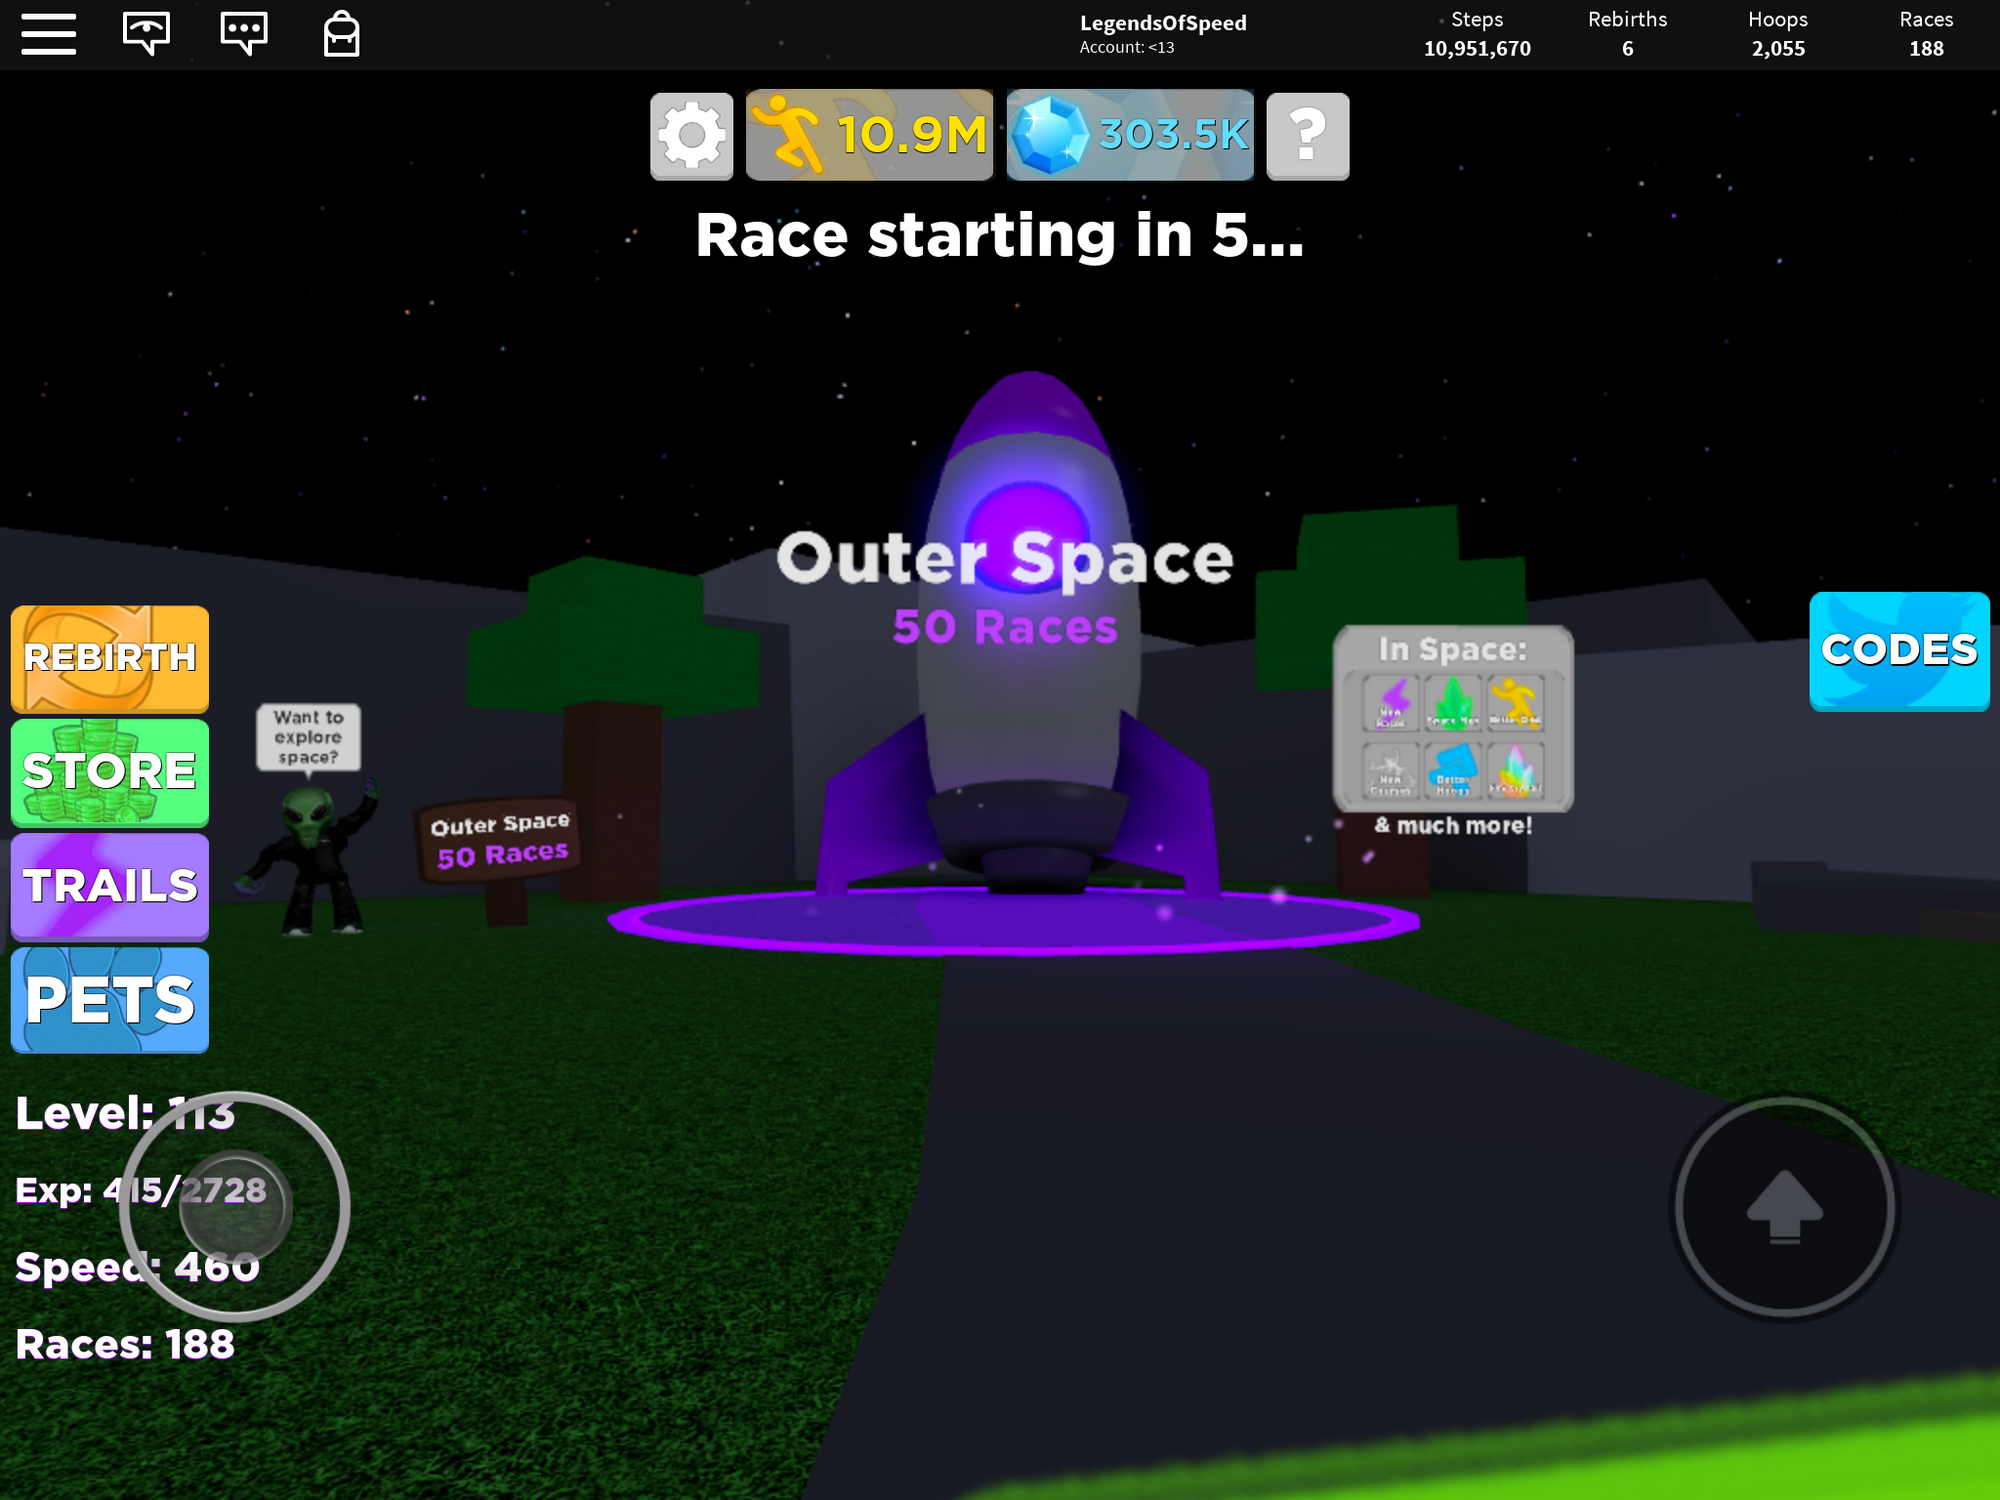 Codes For Legends Of Speed Roblox 2019 Wiki - space legends of speed roblox